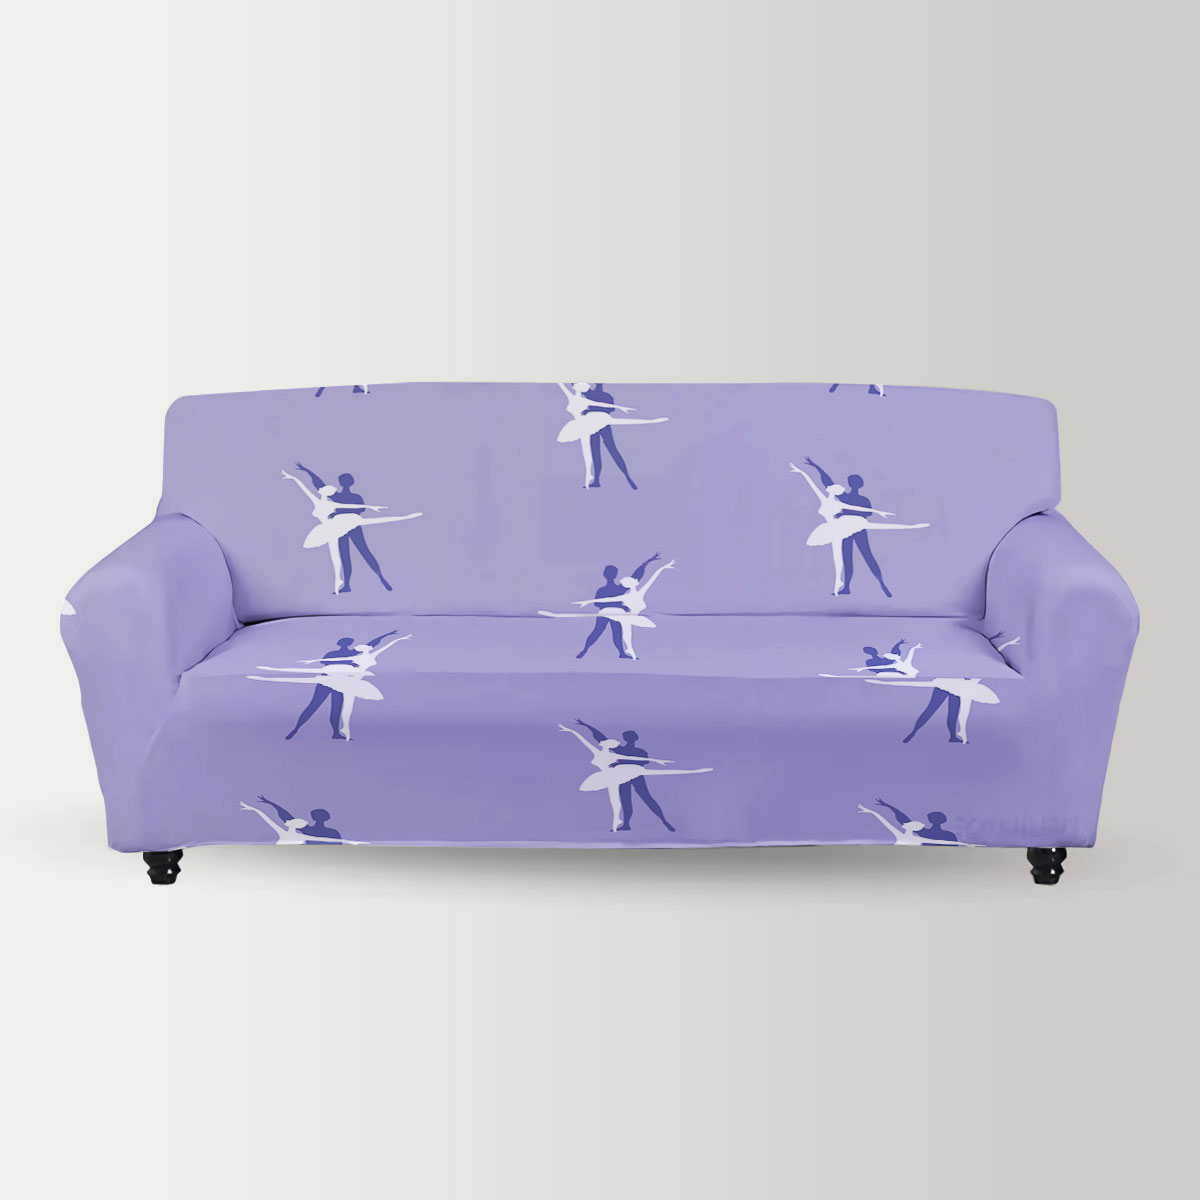 Couple Classical Ballet Dancers Sofa Cover